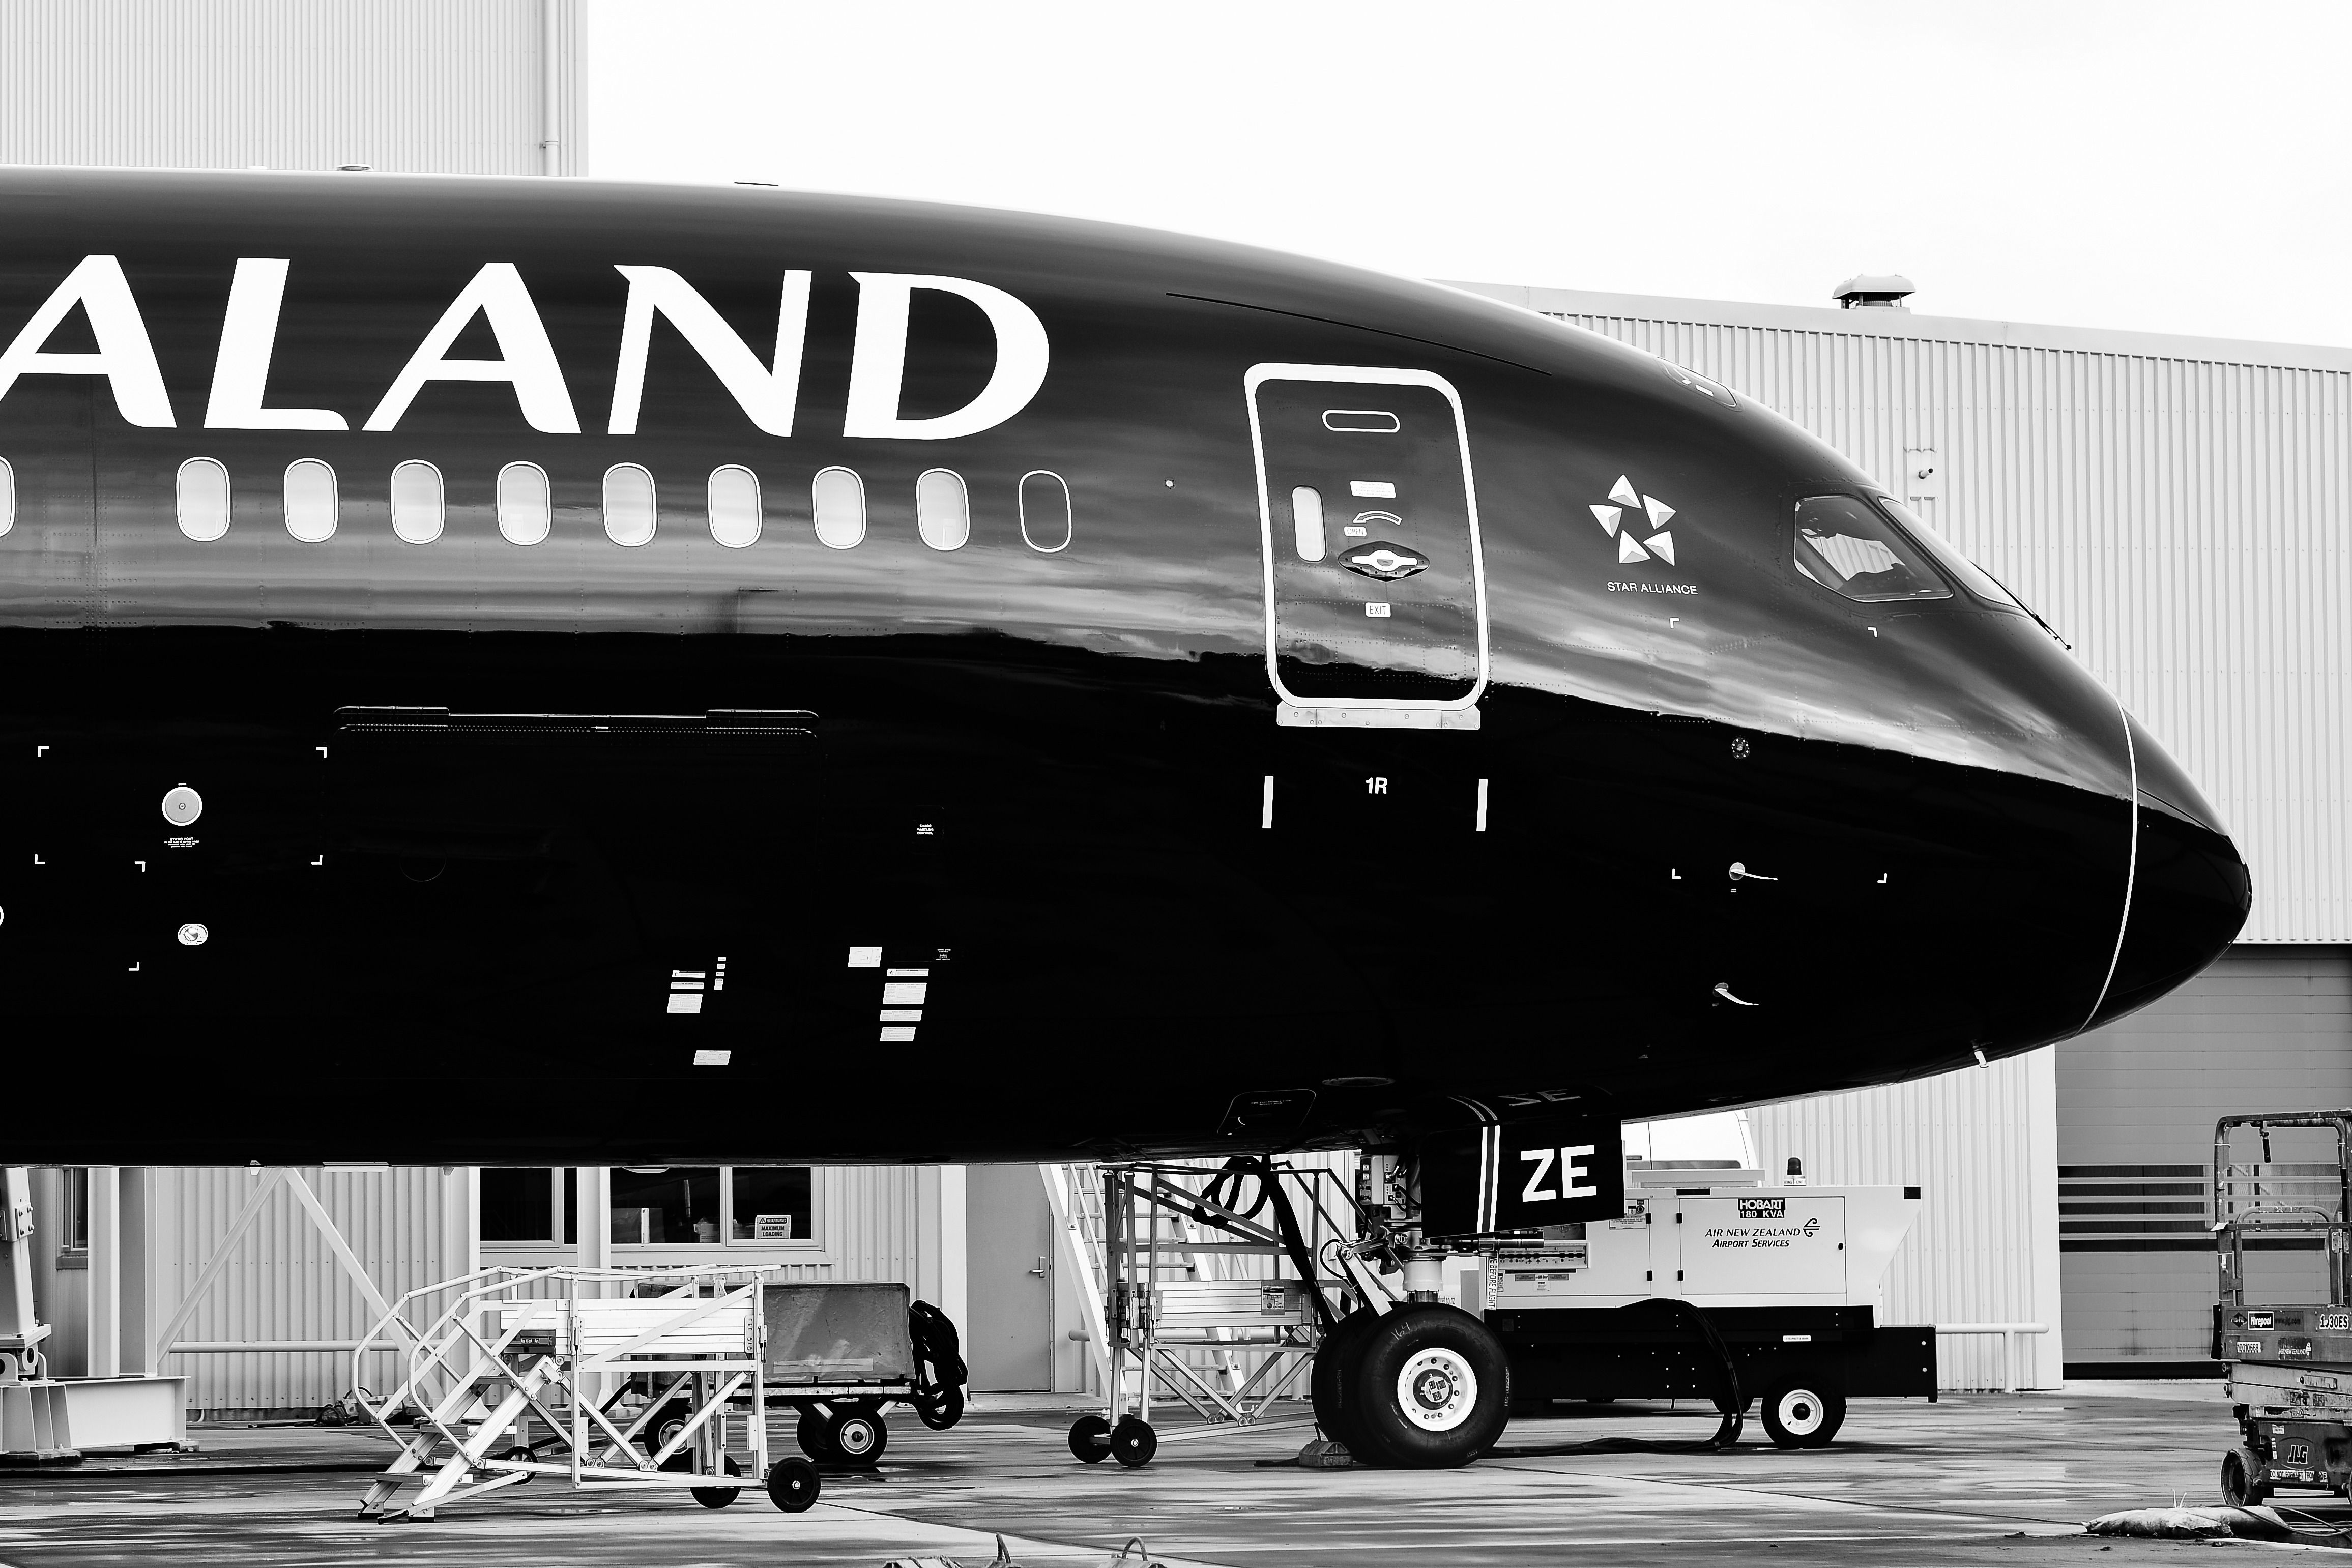 A Closeup of the nose of an Air New Zealand Boeing 787 parked on an airport apron.